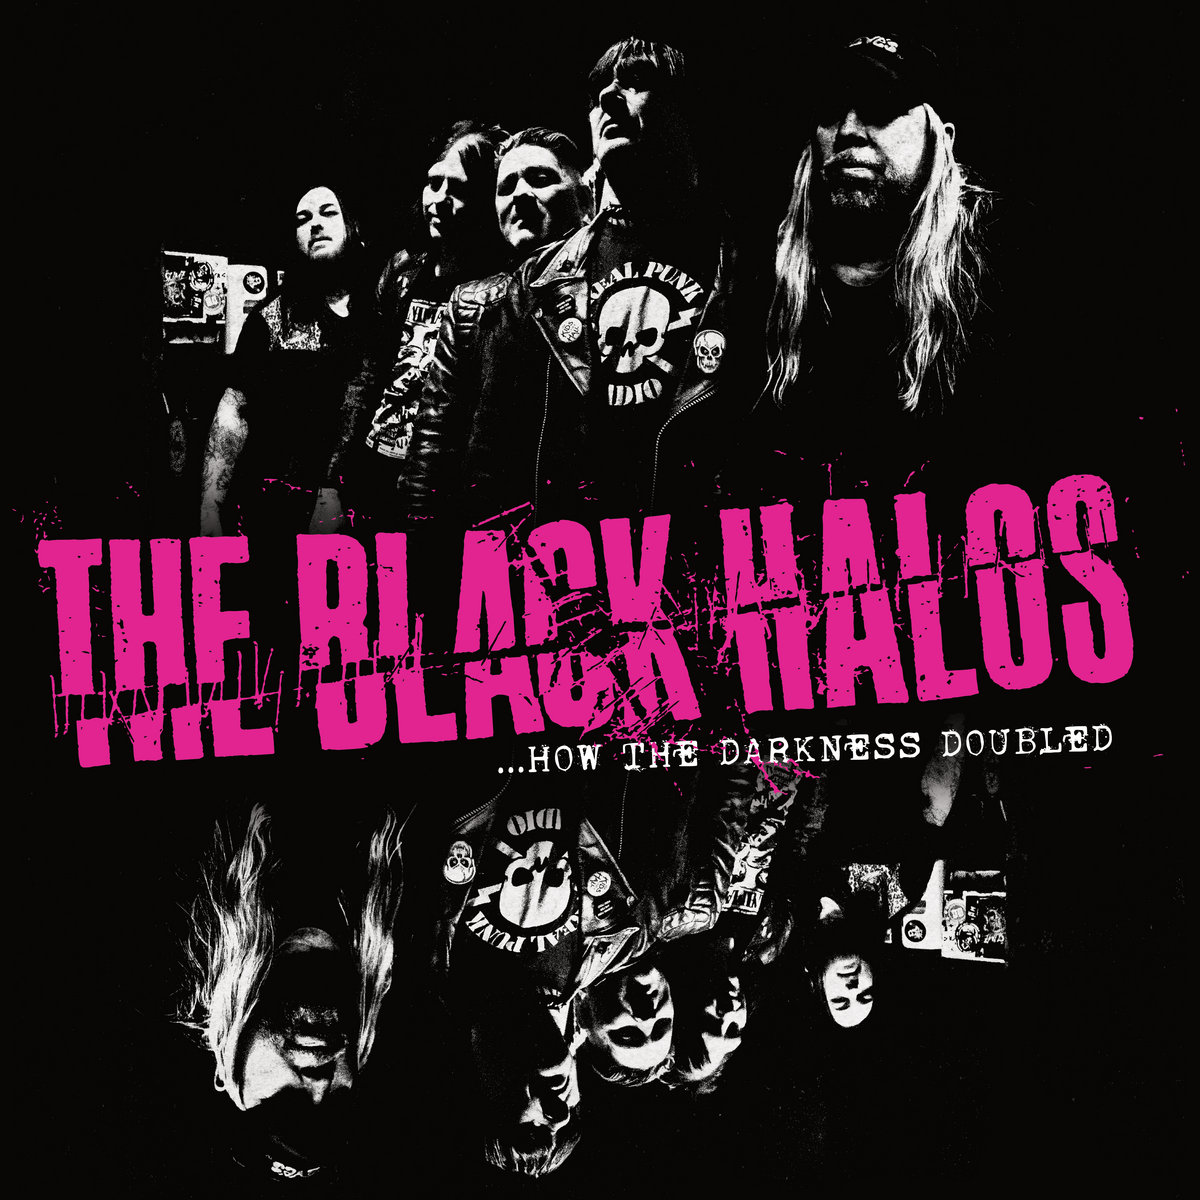 The Black Halos - How The Darkness Doubled